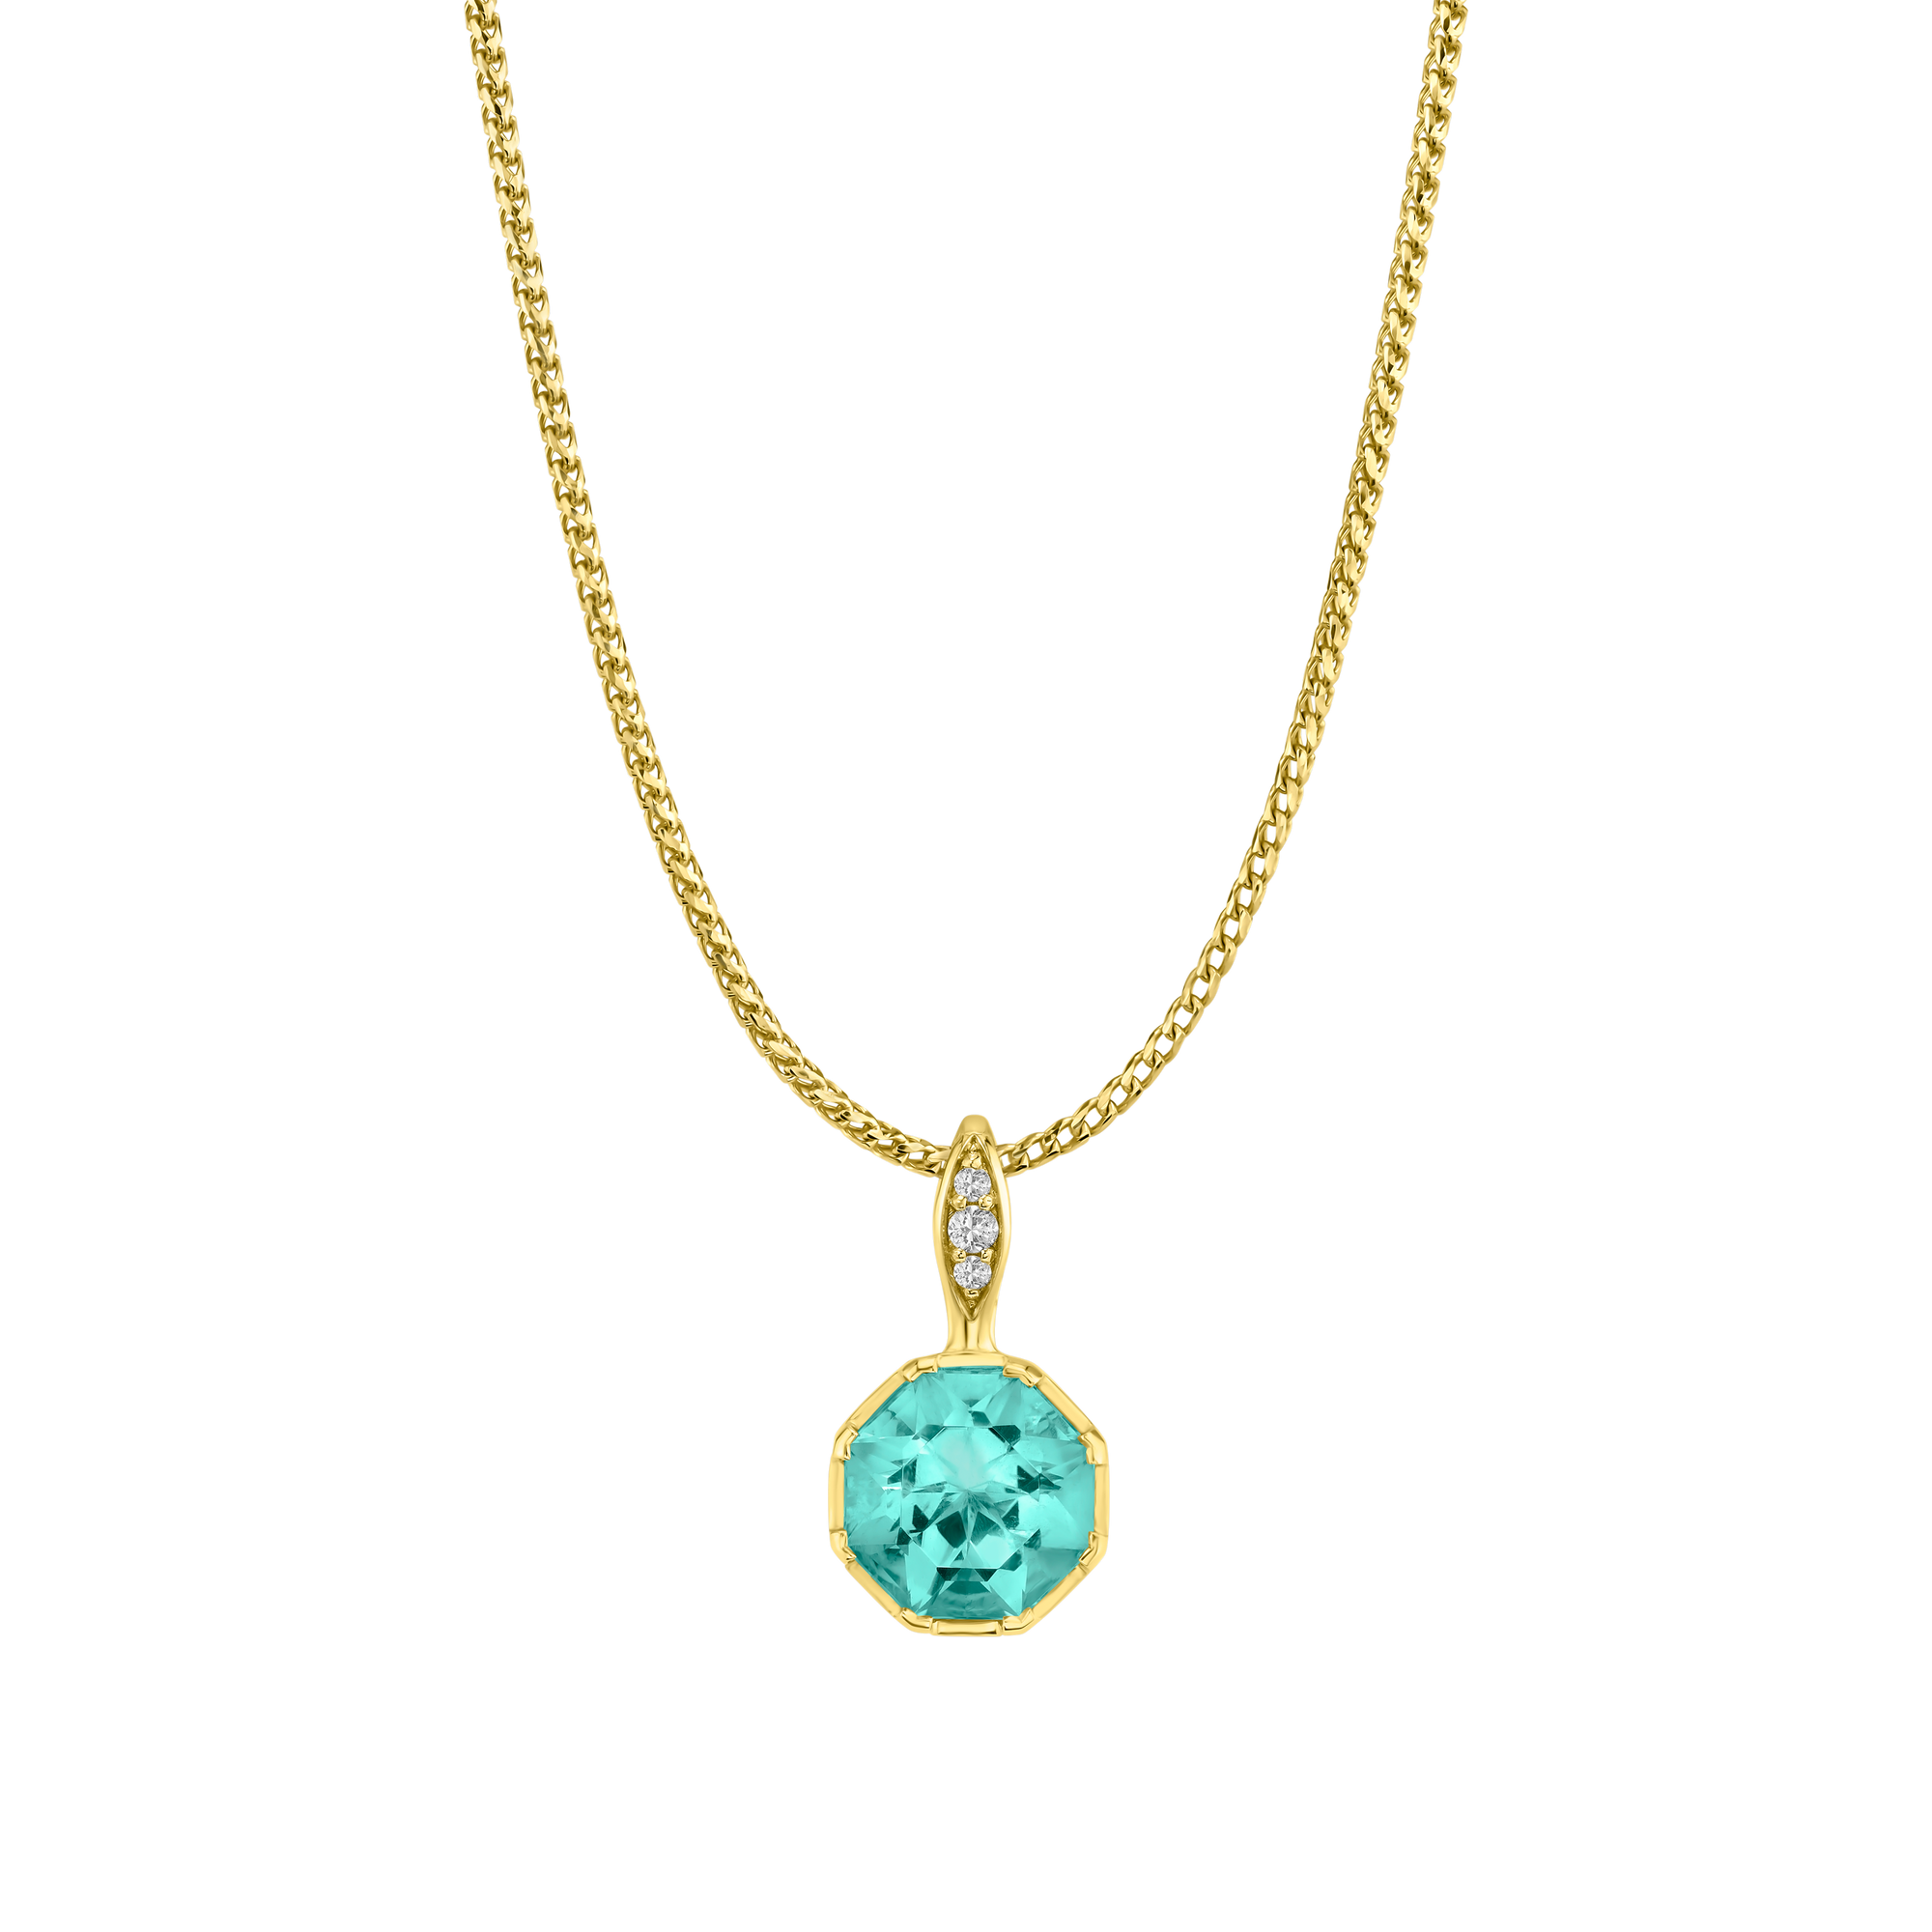 Sacred Shade Necklace featuring a Precision-Cut Aquamarine with Diamond Pave